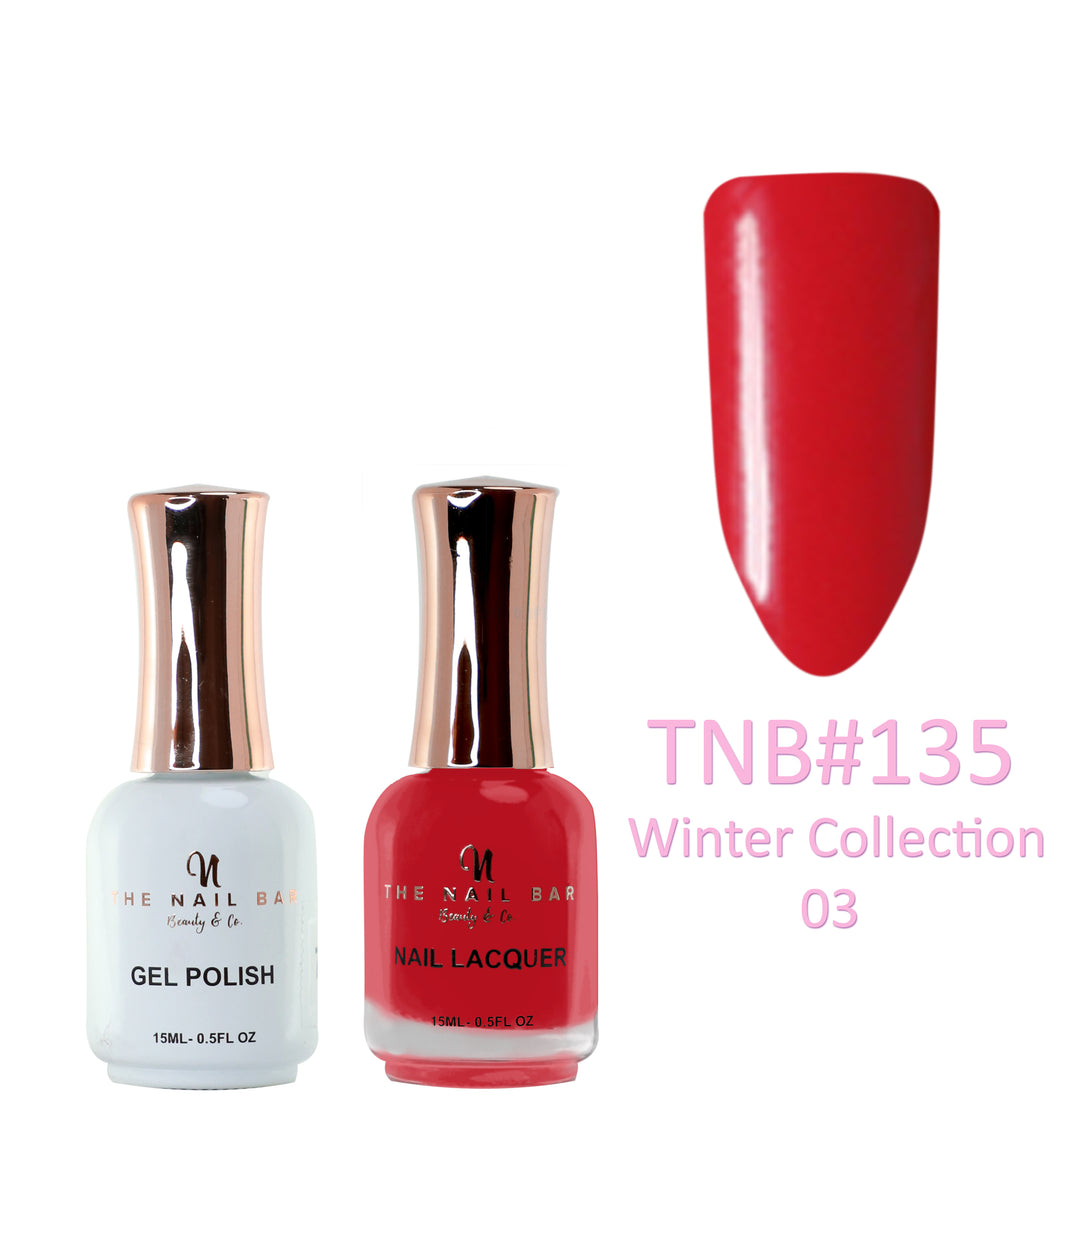 Dual Polish/Gel colour matching (15ml) - Winter collection 03